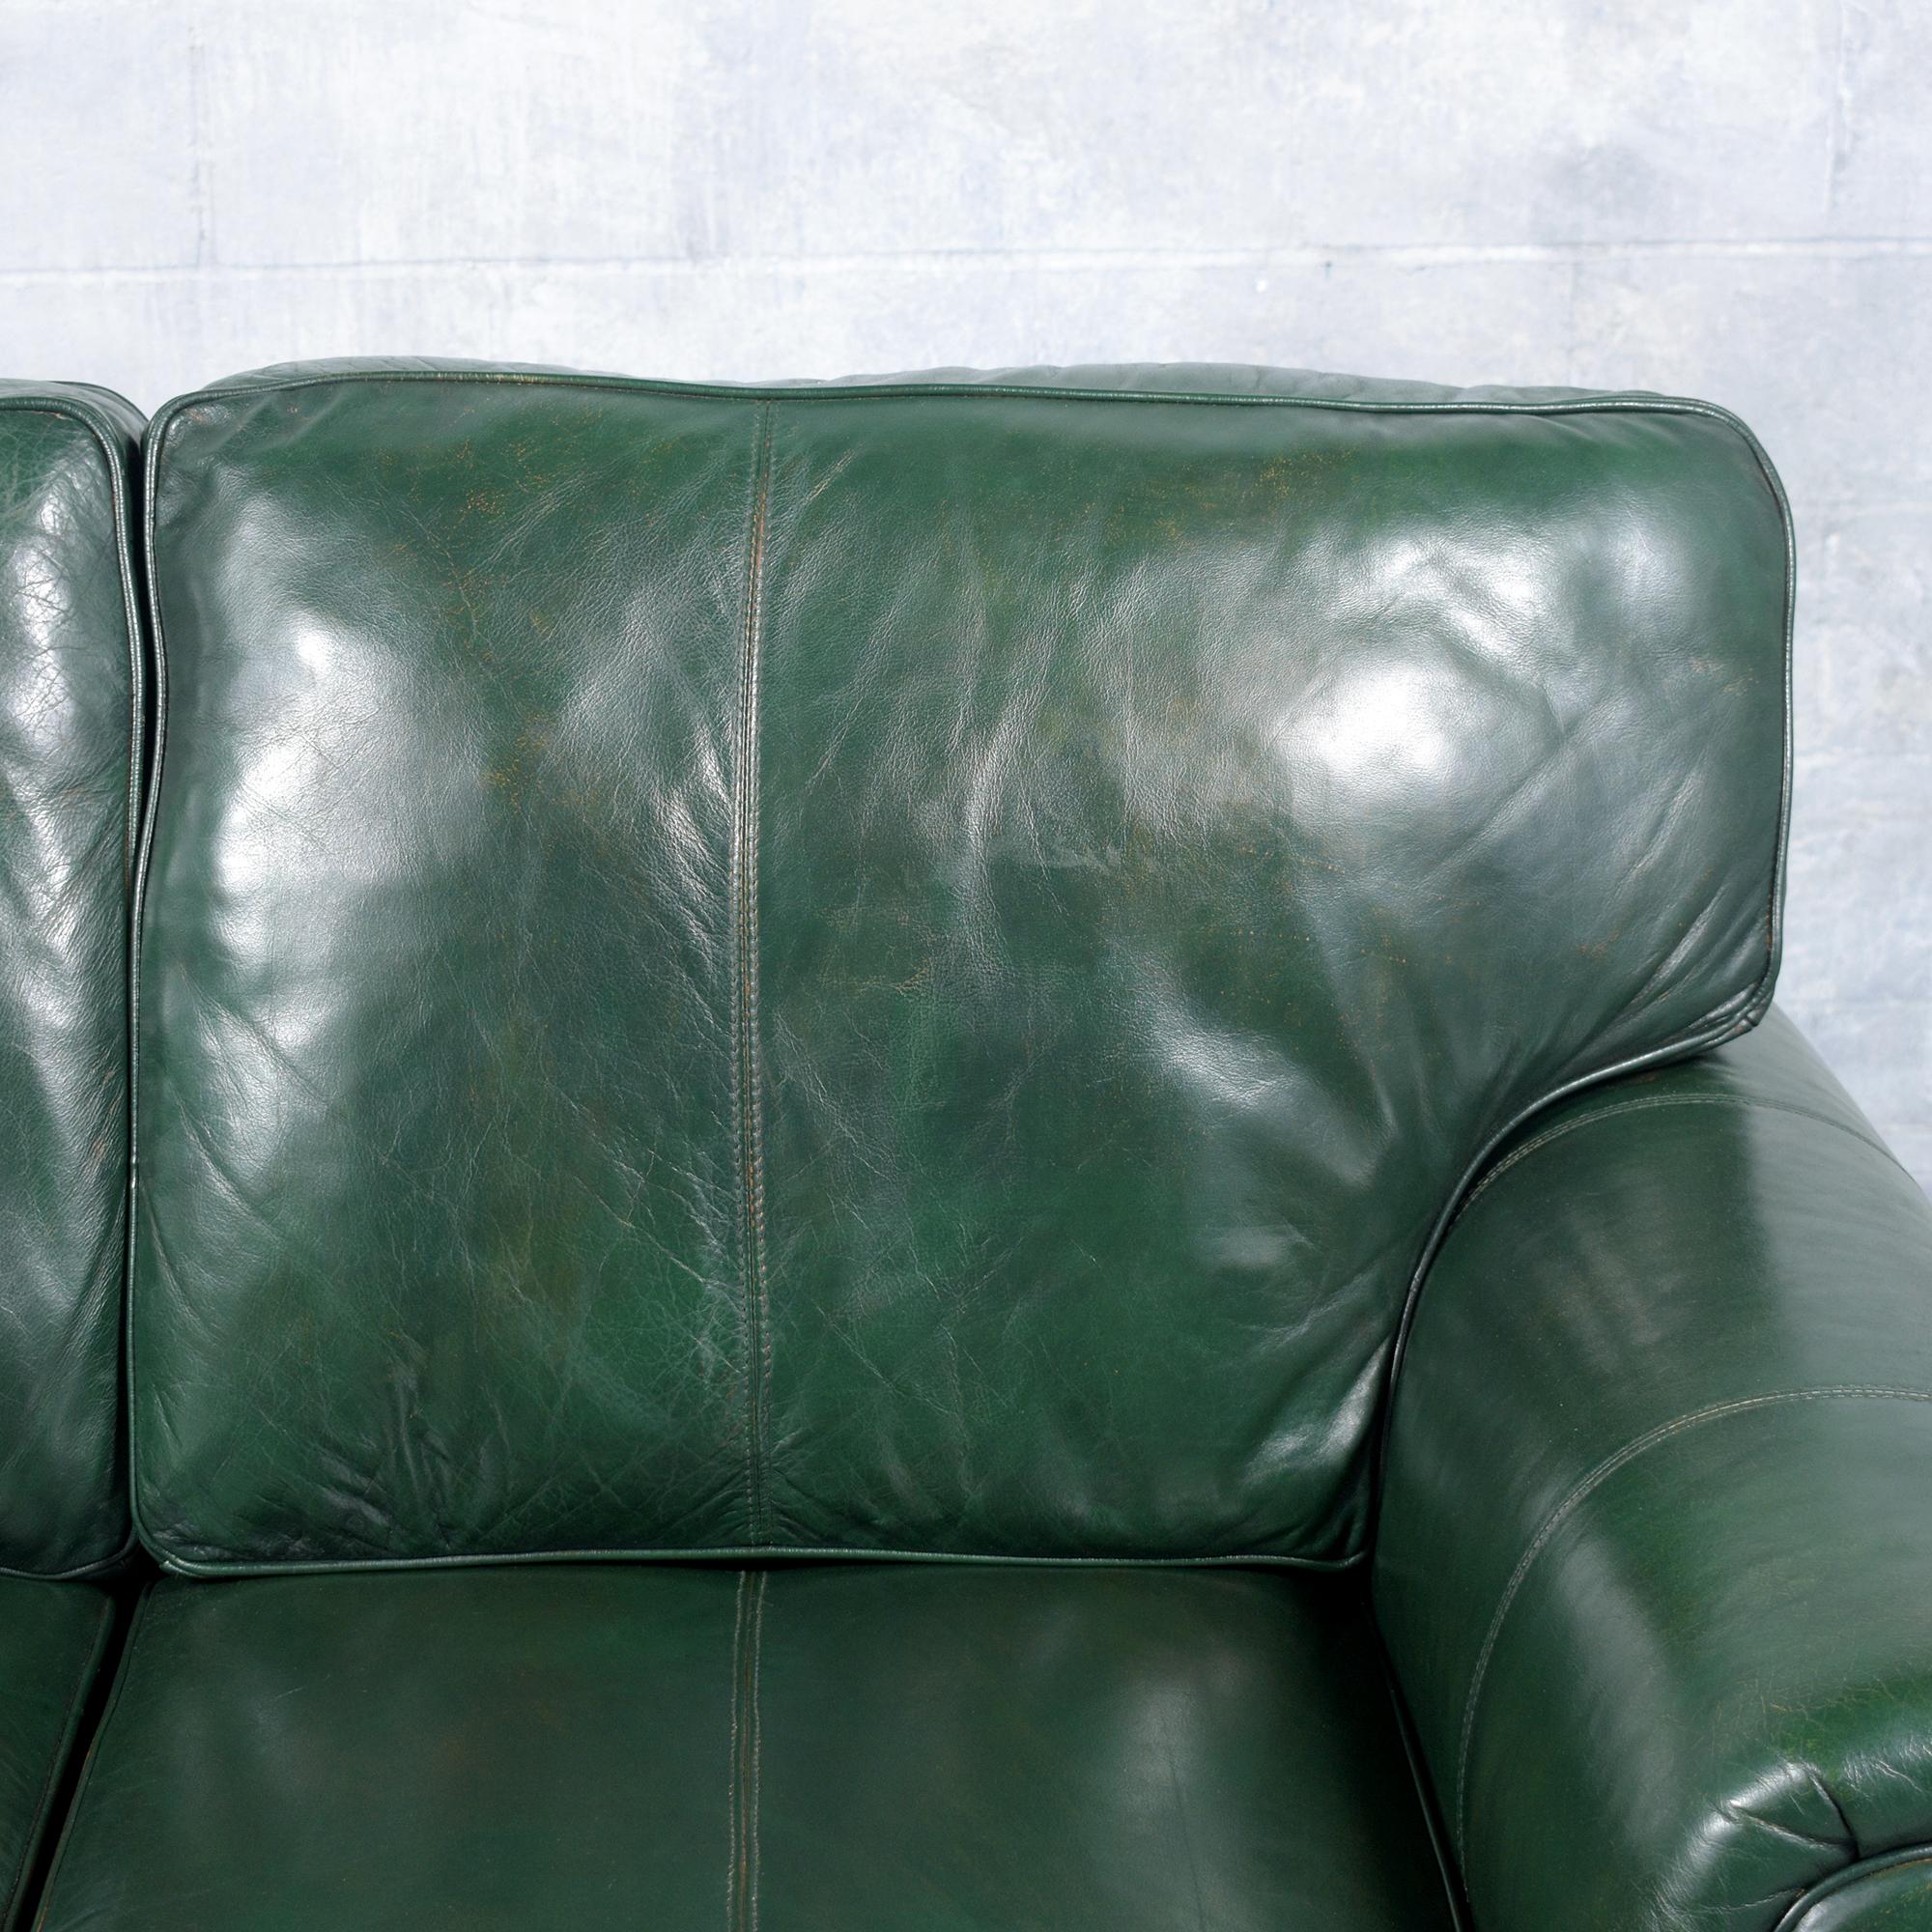 American Restored 1980s Vintage Leather Sofa in Dark Green with Carved Bun Legs For Sale